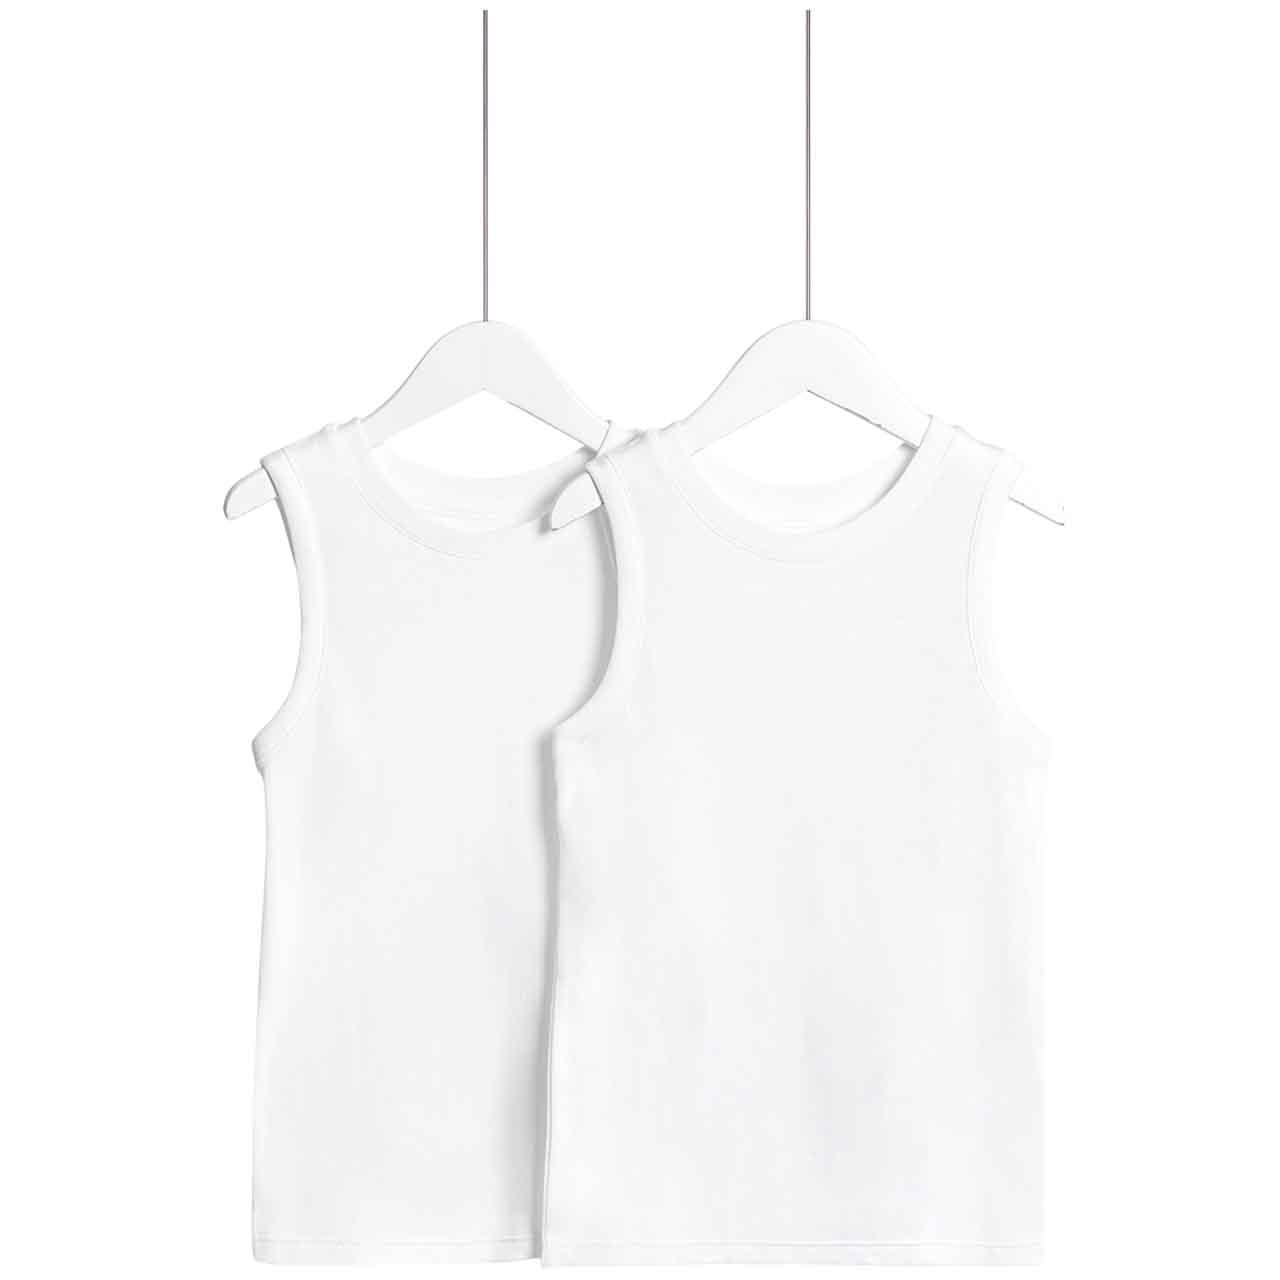 M&S Thermal Vest, 9-10 Years, White, 2 Pack 